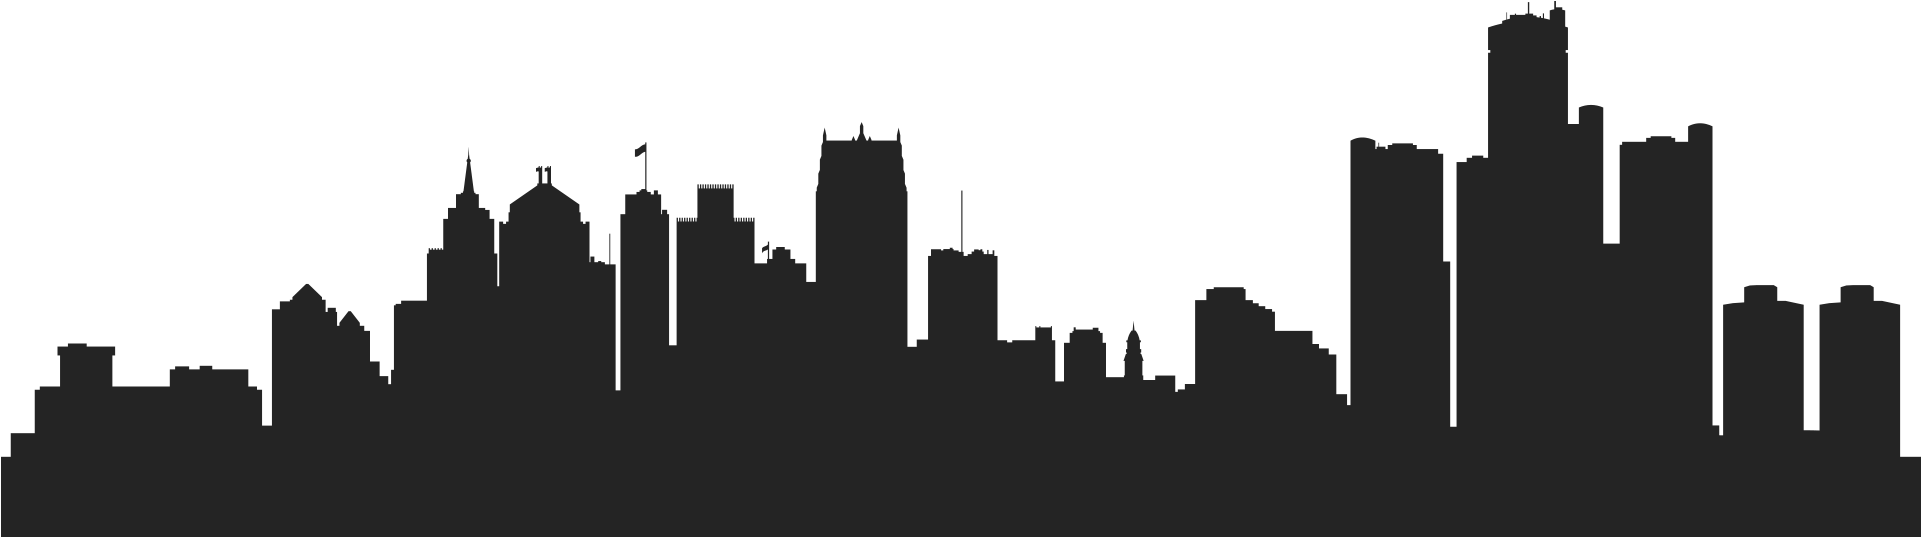 Book Your Ticket Now - Detroit City Skyline Silhouette (1920x560), Png Download